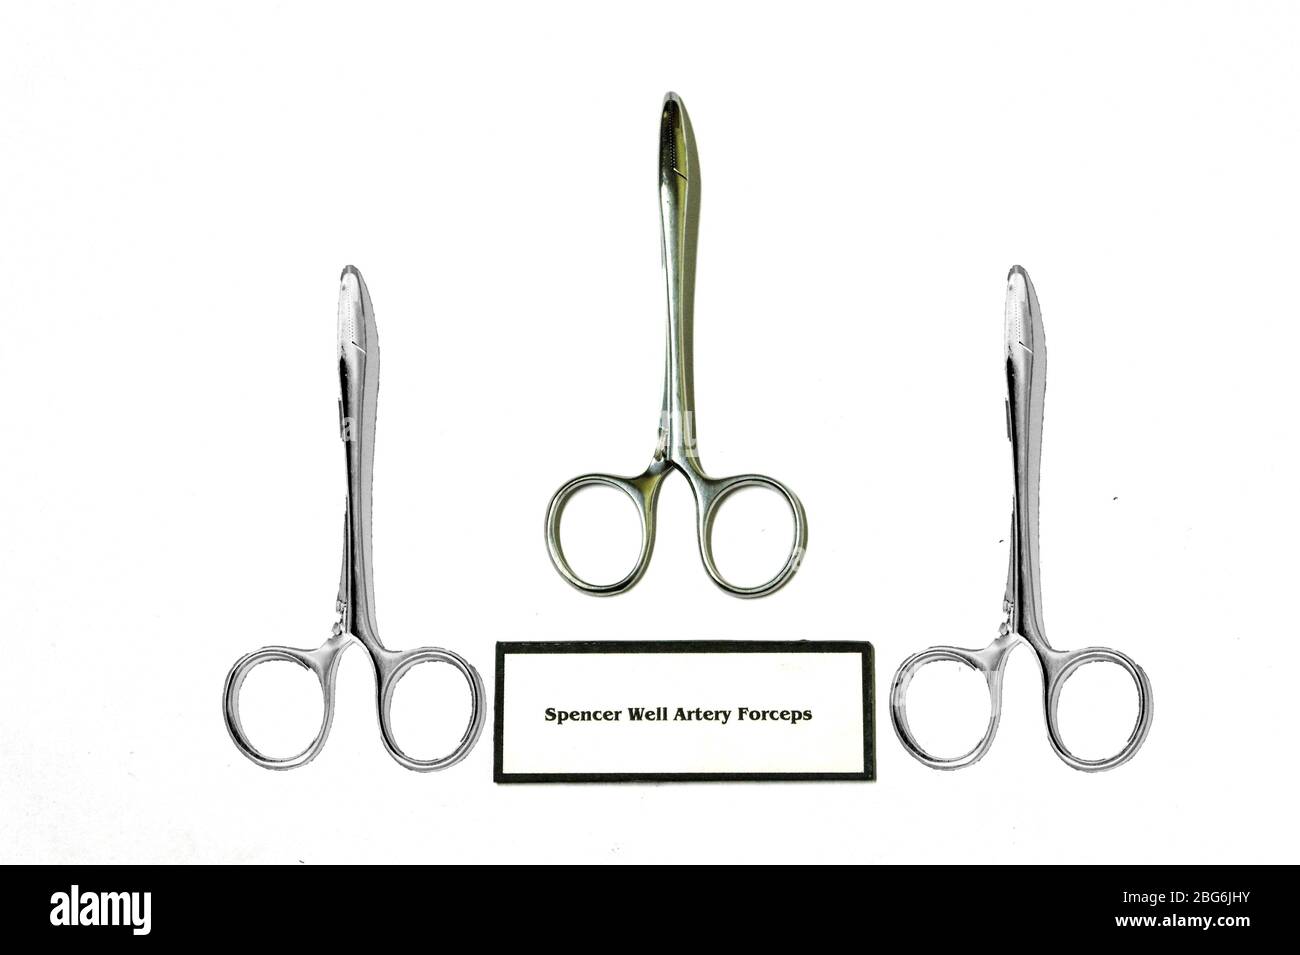 A trio of vintage Spencer Well Artery Forceps, named after their inventor, and used in surgery to prevent arteries and tissues being entangled. Stock Photo